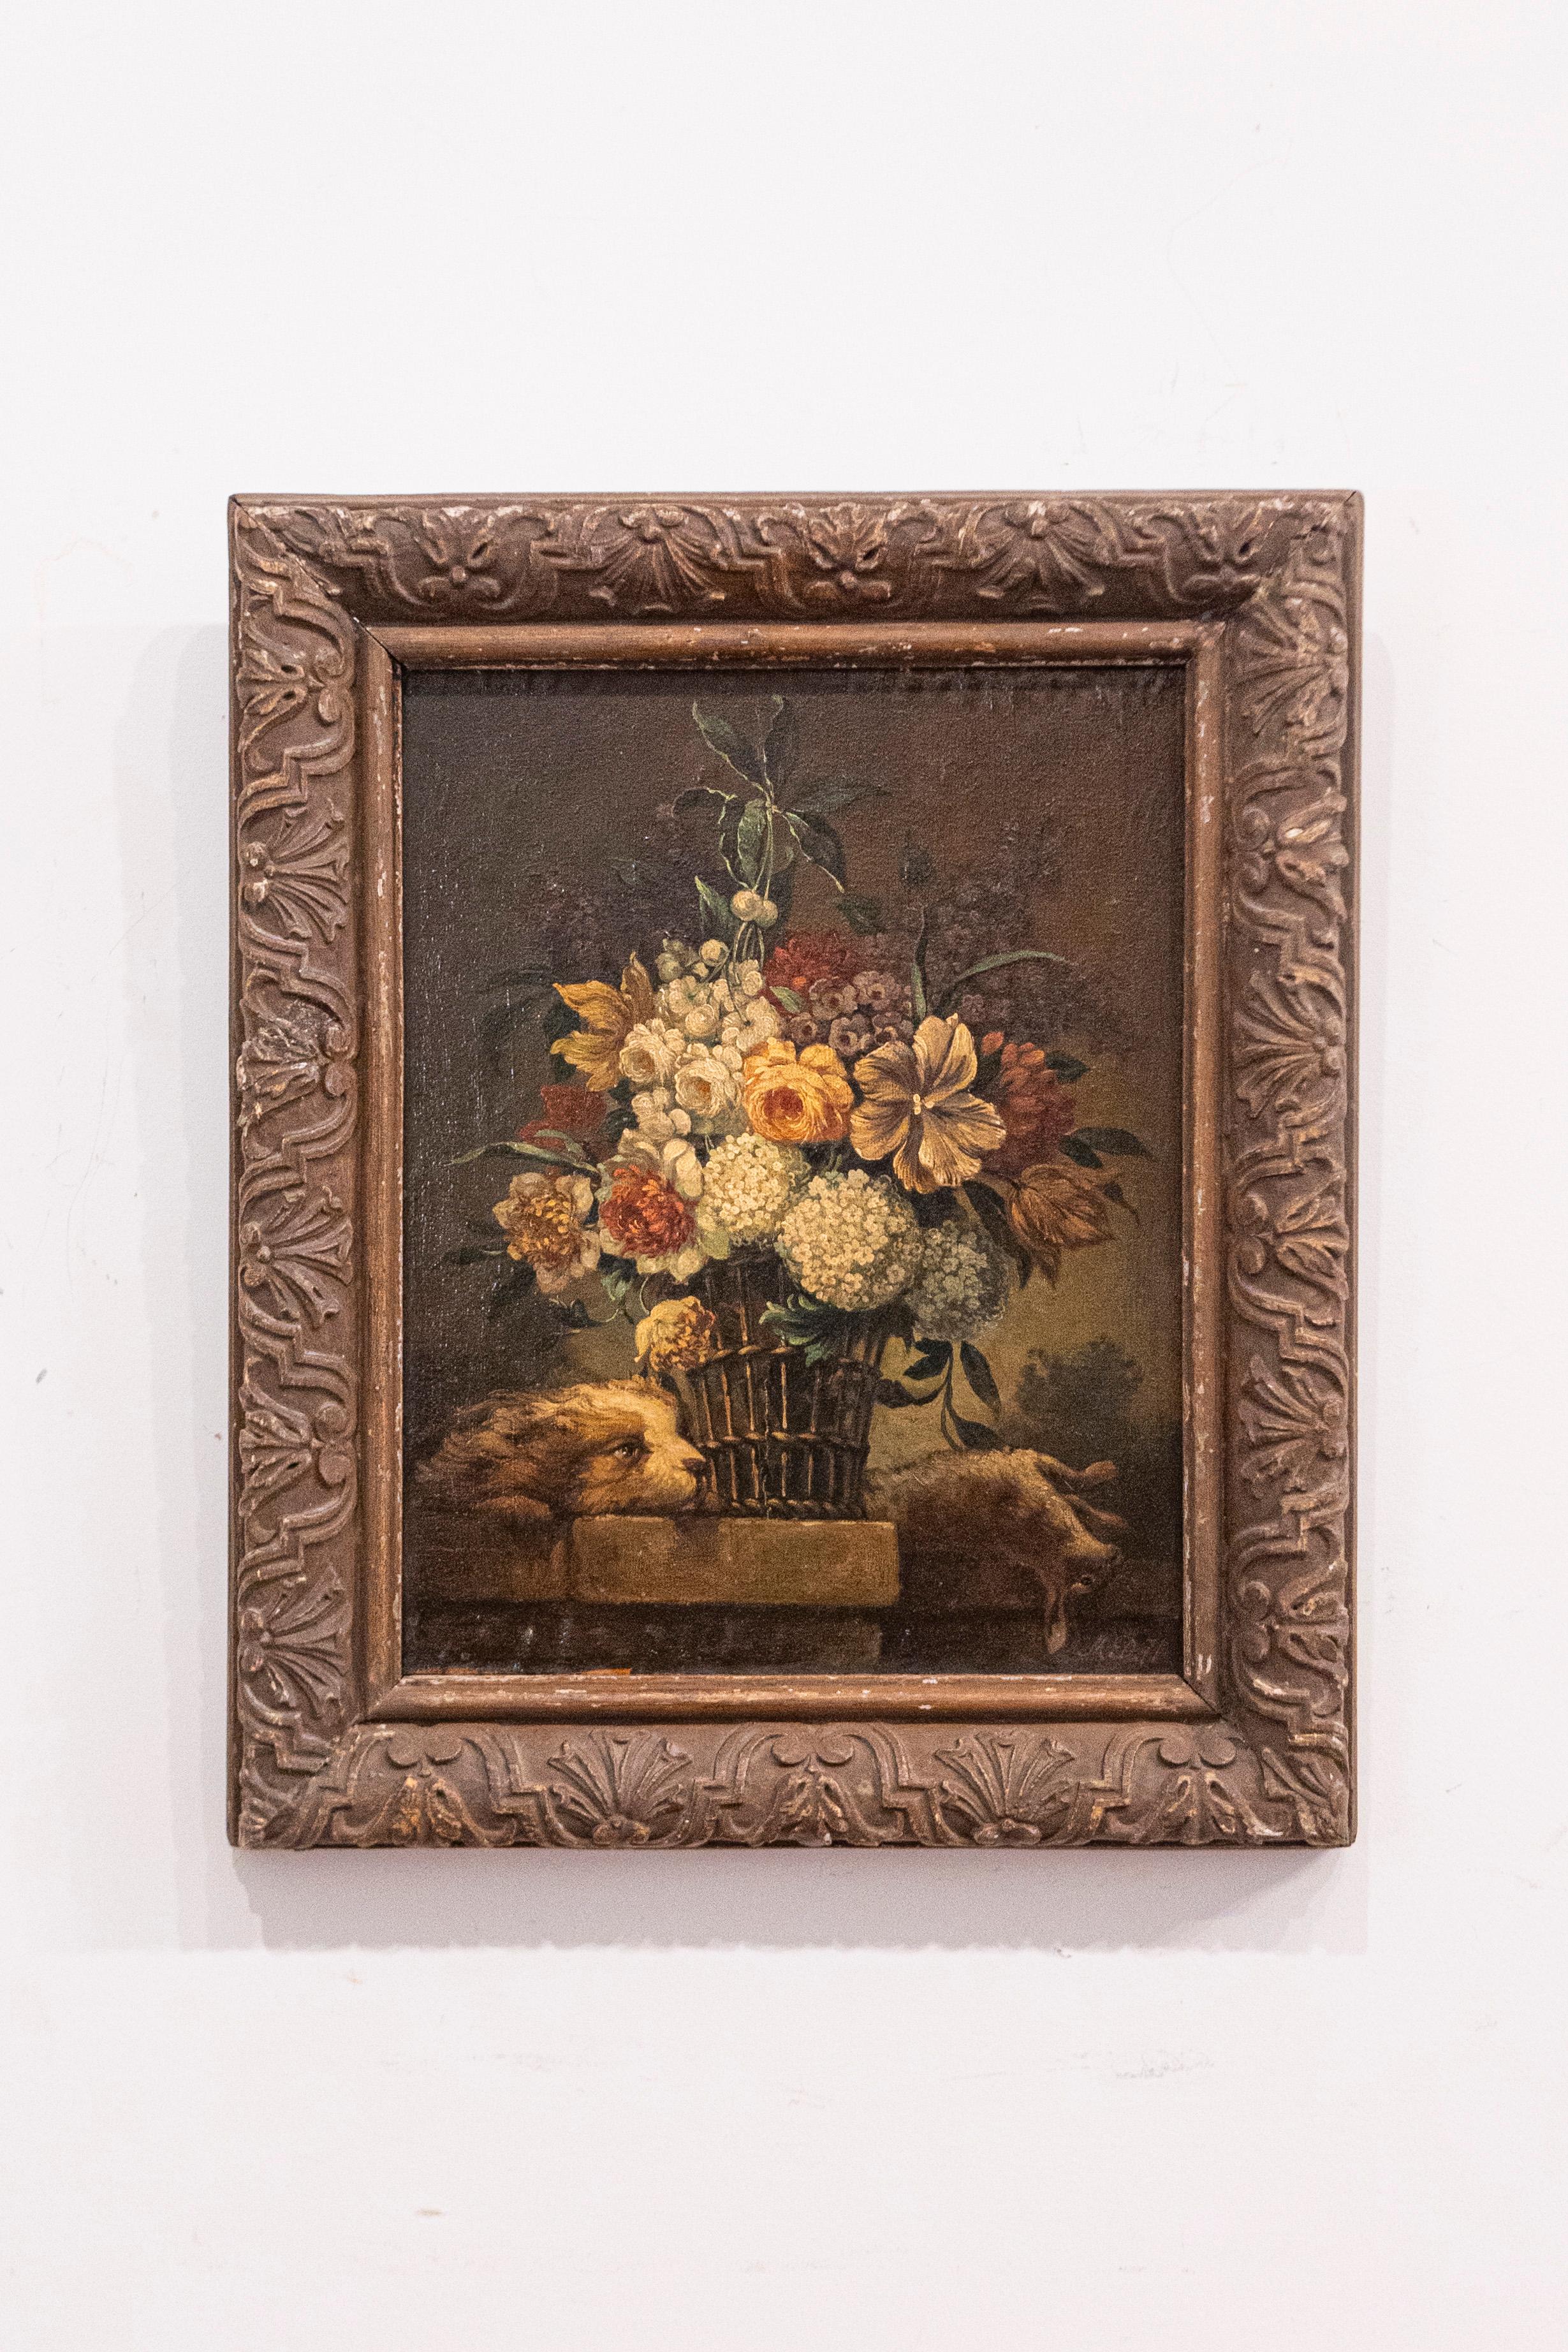 A French framed Louis XV style oil on panel still-life floral painting from the late 19th century, with dog and rabbit motifs. Born in the third quarter of the 19th century, this French painting features a theme particularly popular in Europe since